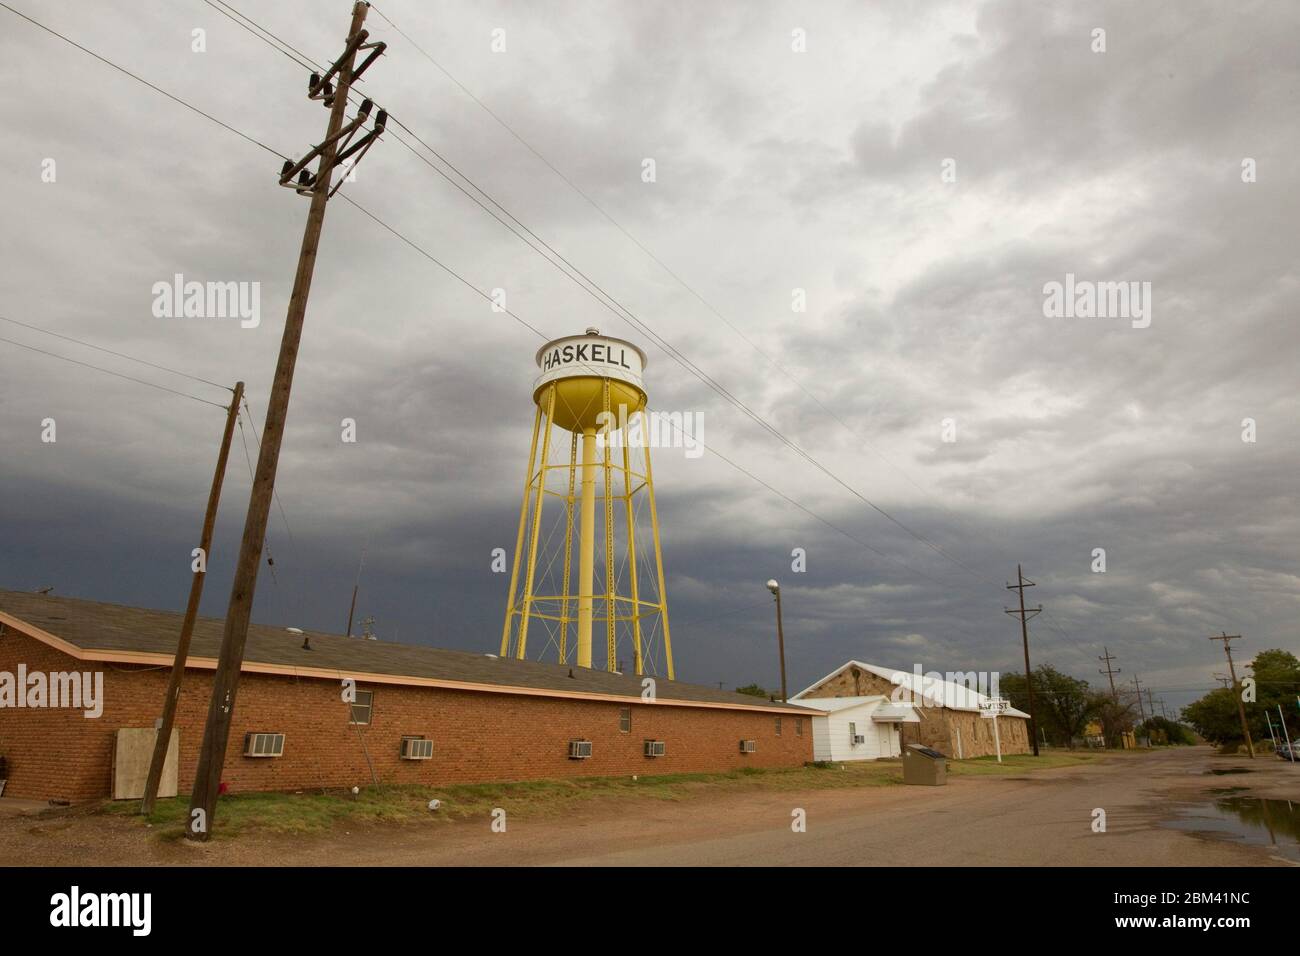 Haskell Texas USA, September 22, 2011: Water tower with the town name on it is the tallest structure around in the small town where Texas First Lady Anita Thigpen Perry grew up in the 1950's and 1960's. Her husband, Texas Gov. Rick Perry, is running for the Republican presidential nomination after 10 years as Texas' longest serving governor.  ©Bob Daemmrich Stock Photo